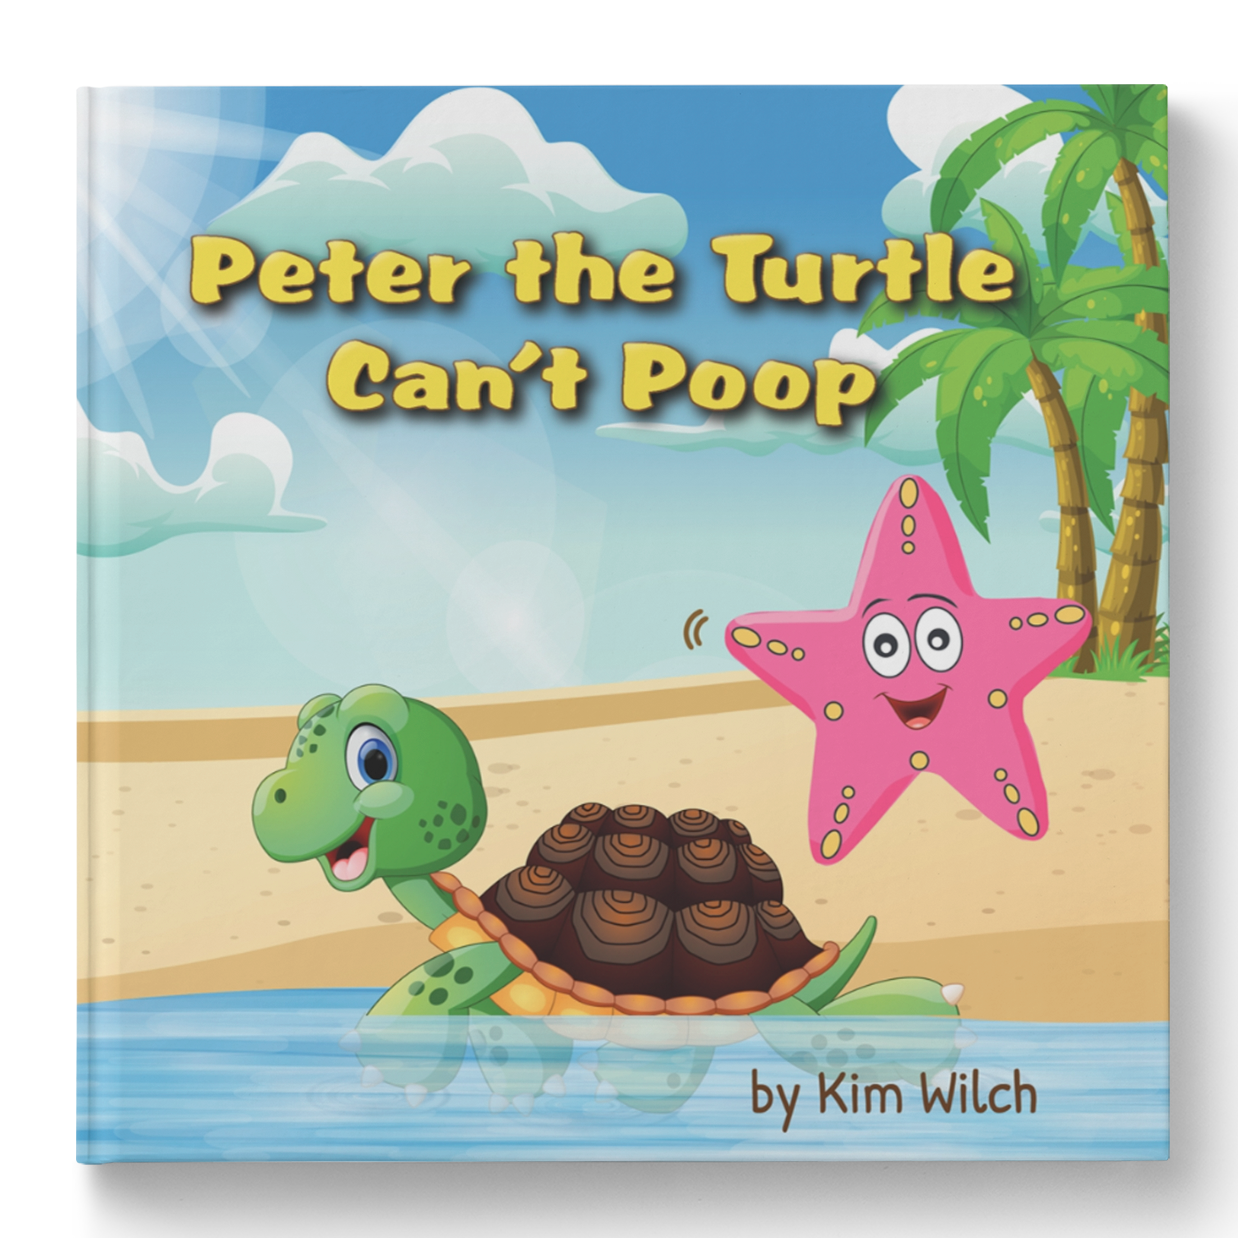 Peter the Turtle Can't Poop